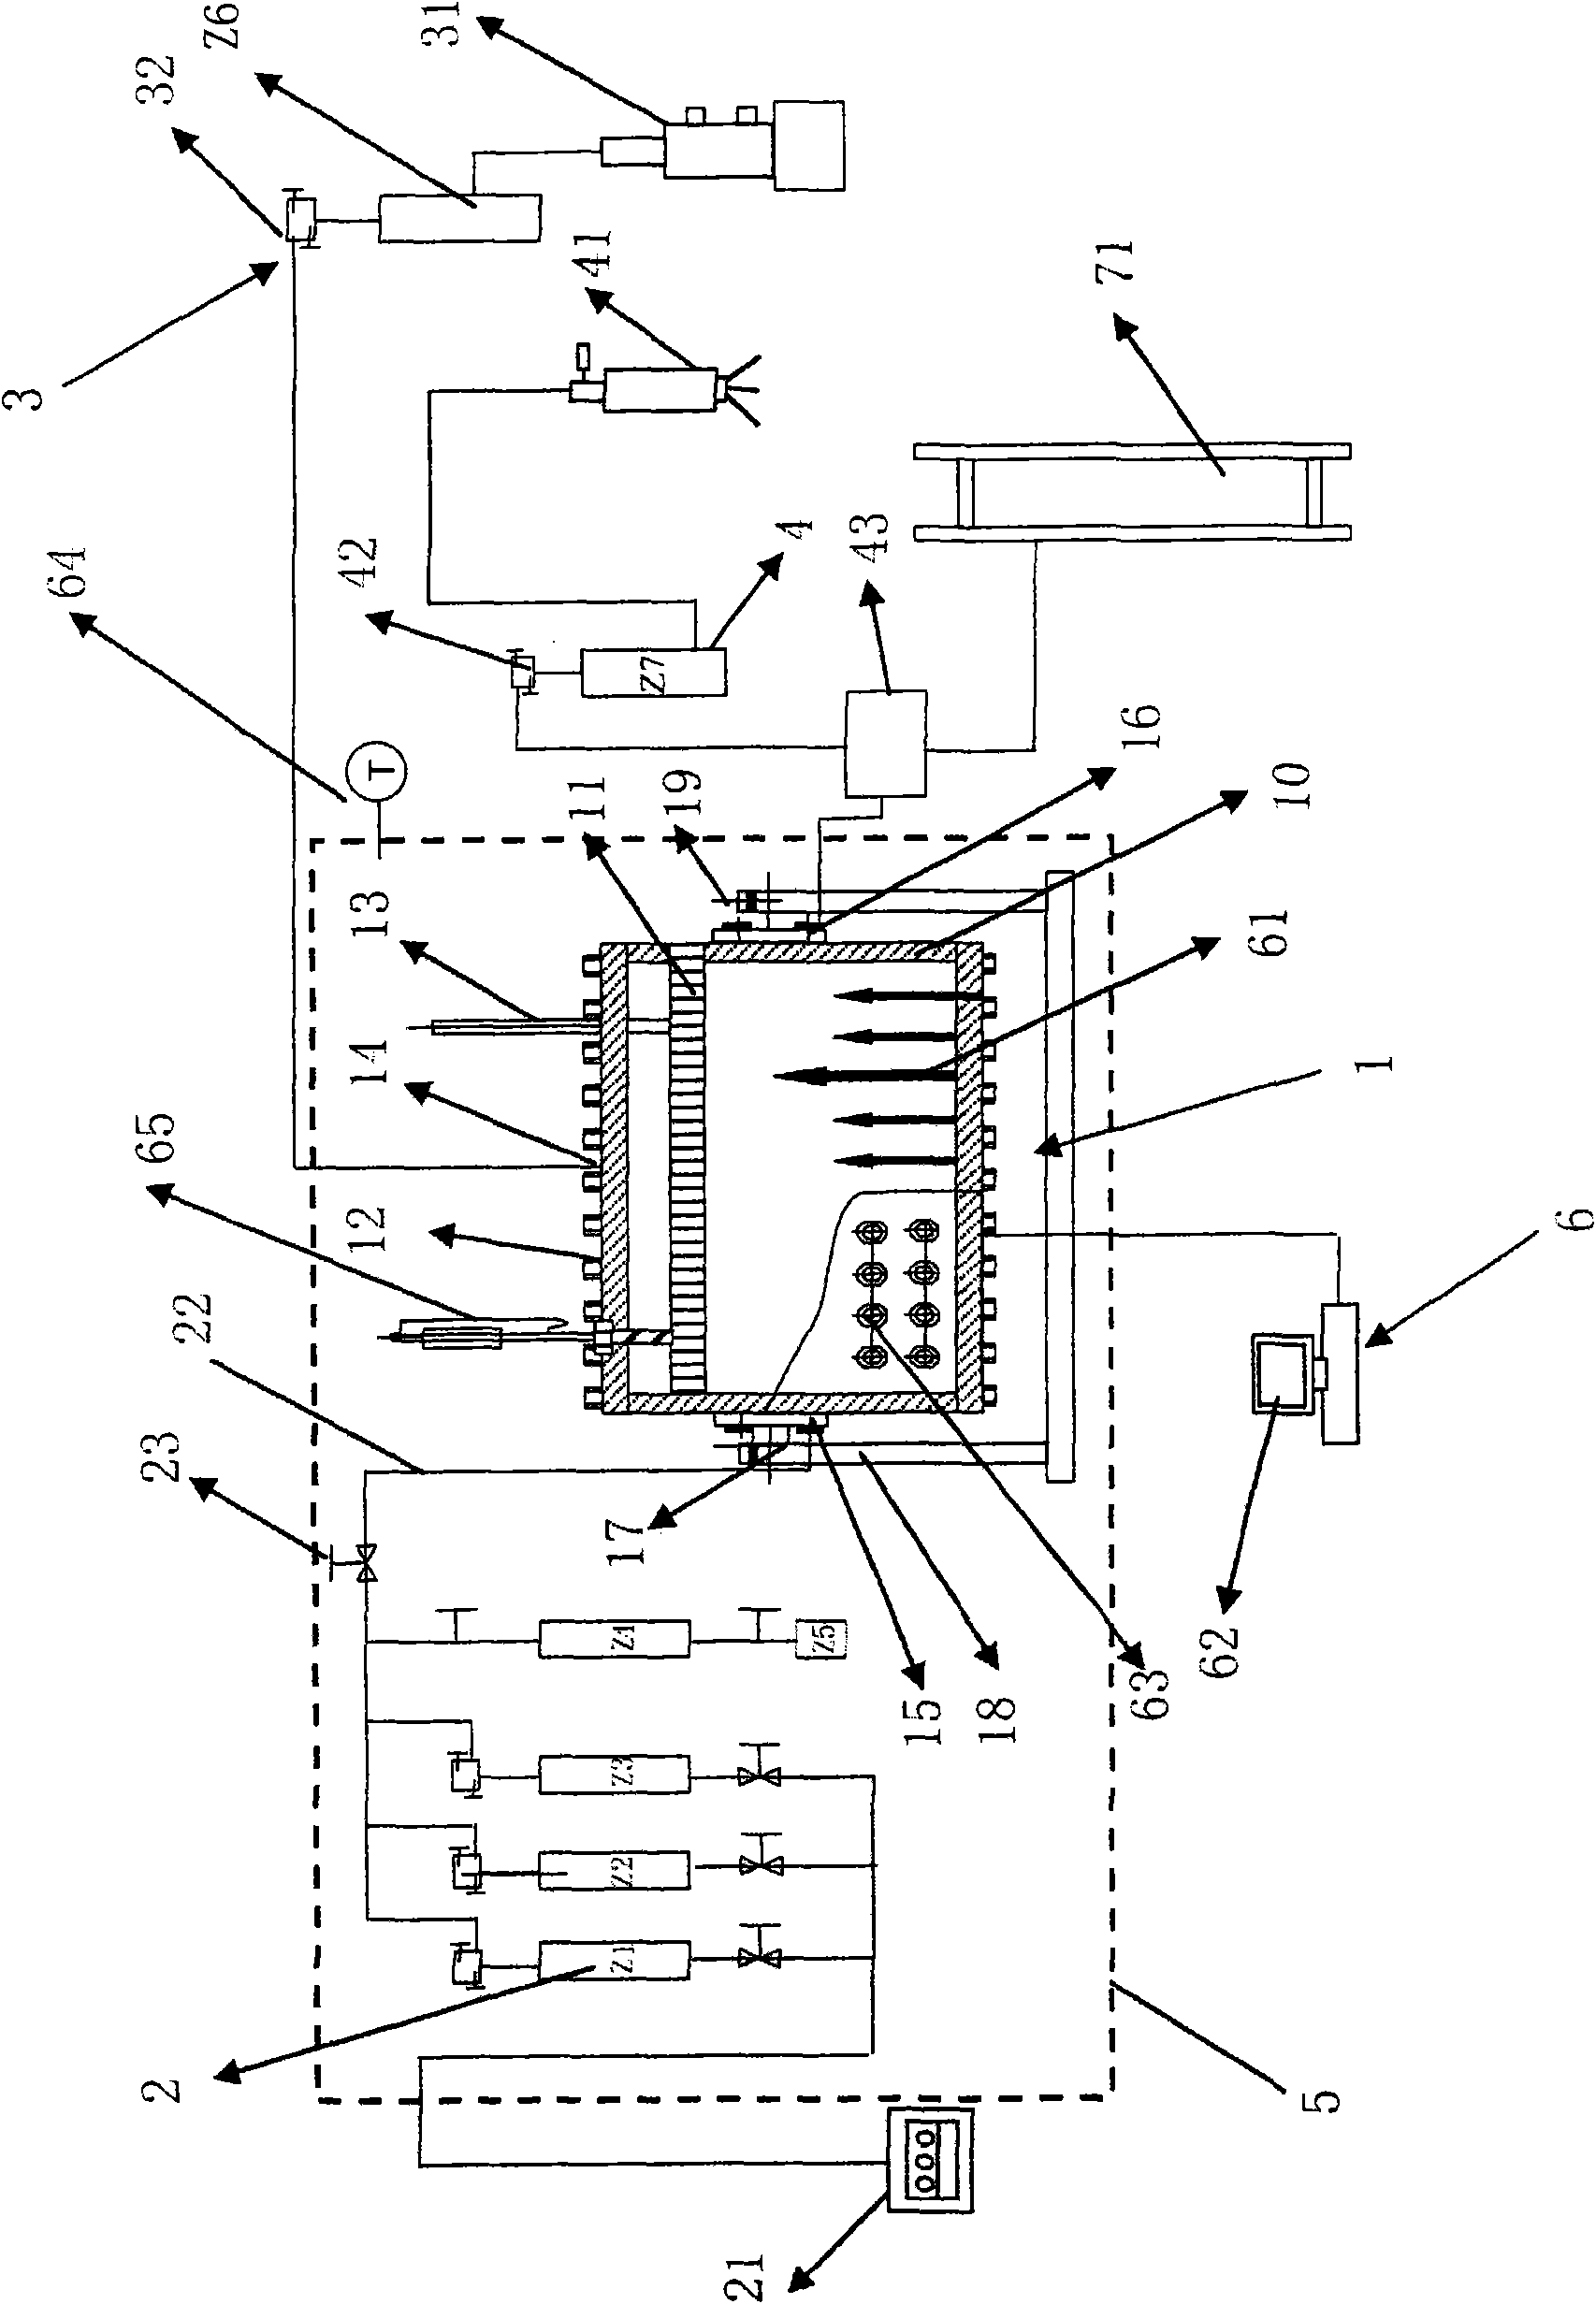 Three-dimensional experimental device for simulating lithologic reservoir forming